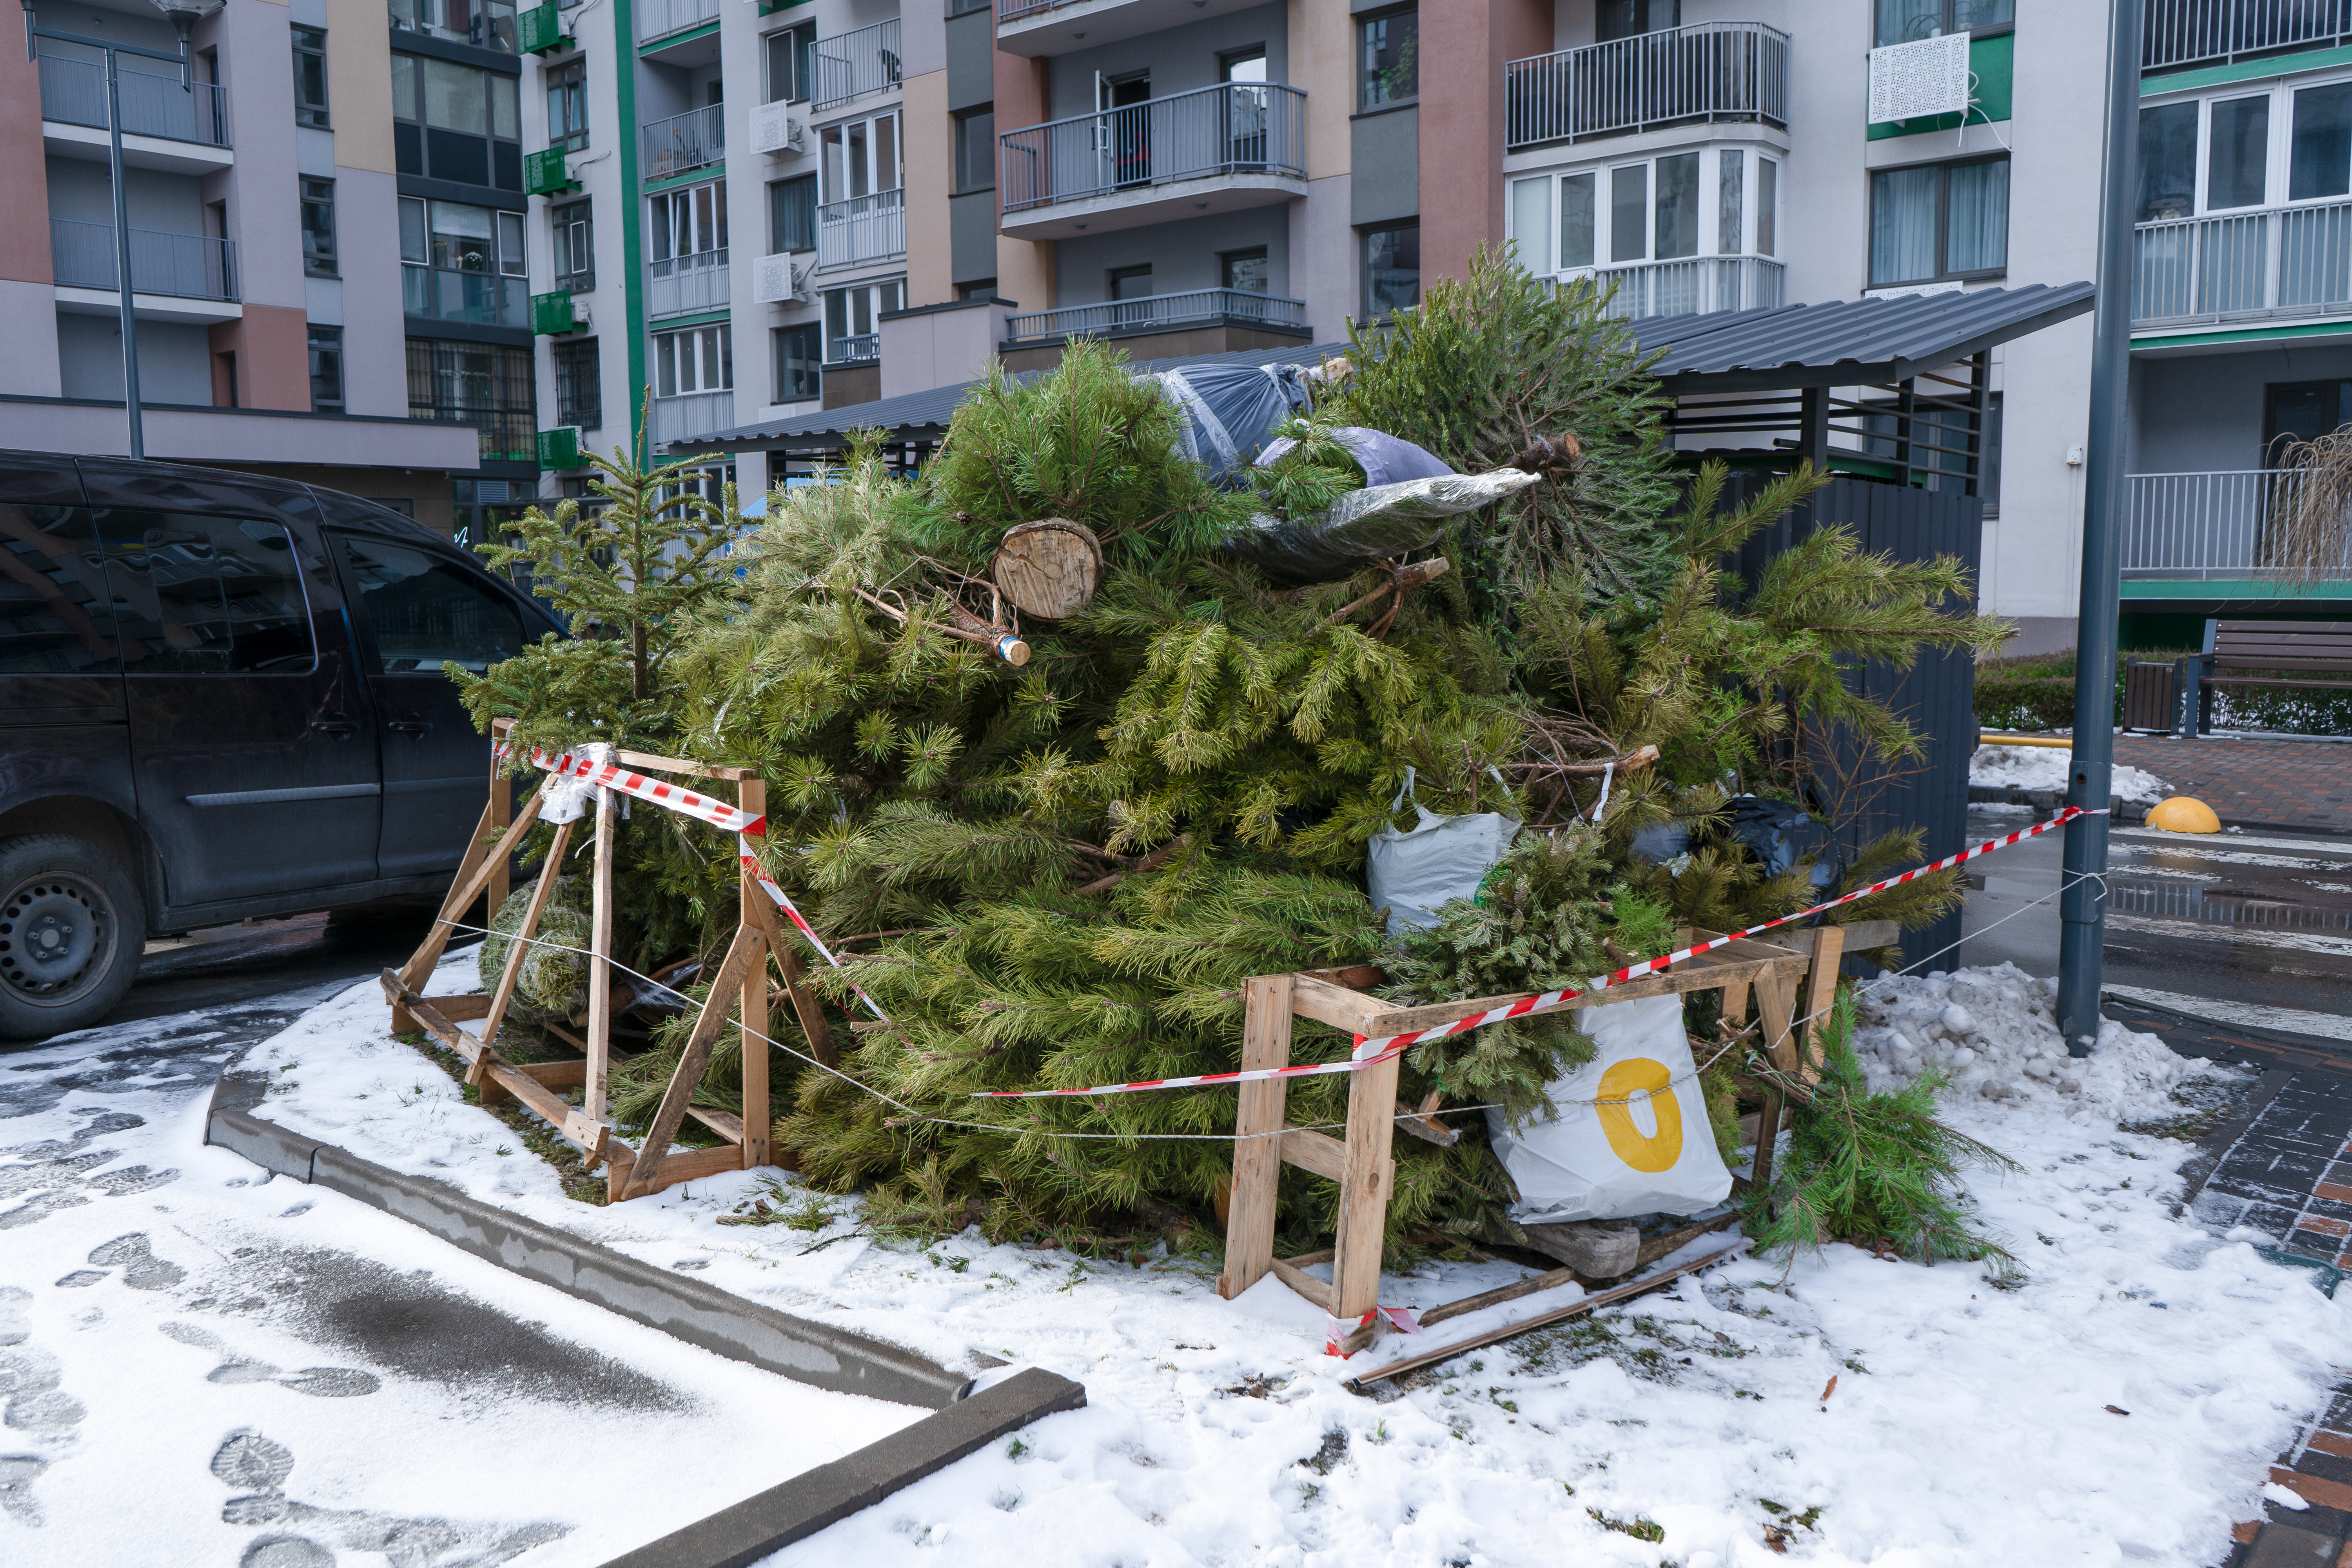 limit waste this Christmas - Recycling Christmas trees after the holidays. A Christmas tree thrown into the trash in a landfill in the courtyard of a residential building.